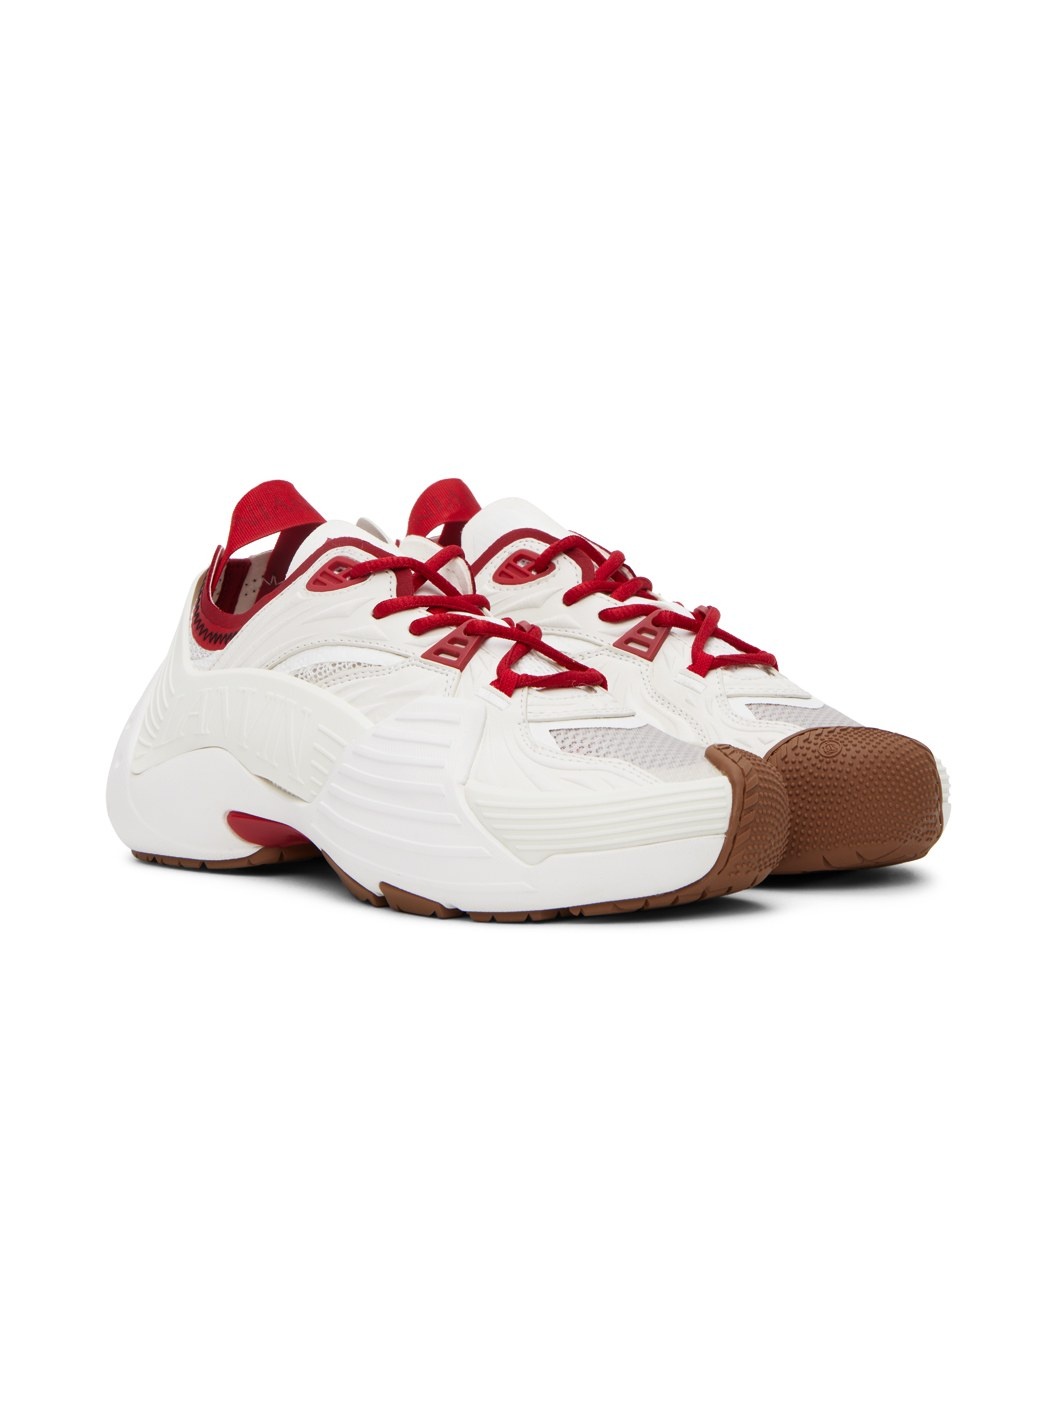 SSENSE Exclusive Red & White Flash-X Sneakers - 4